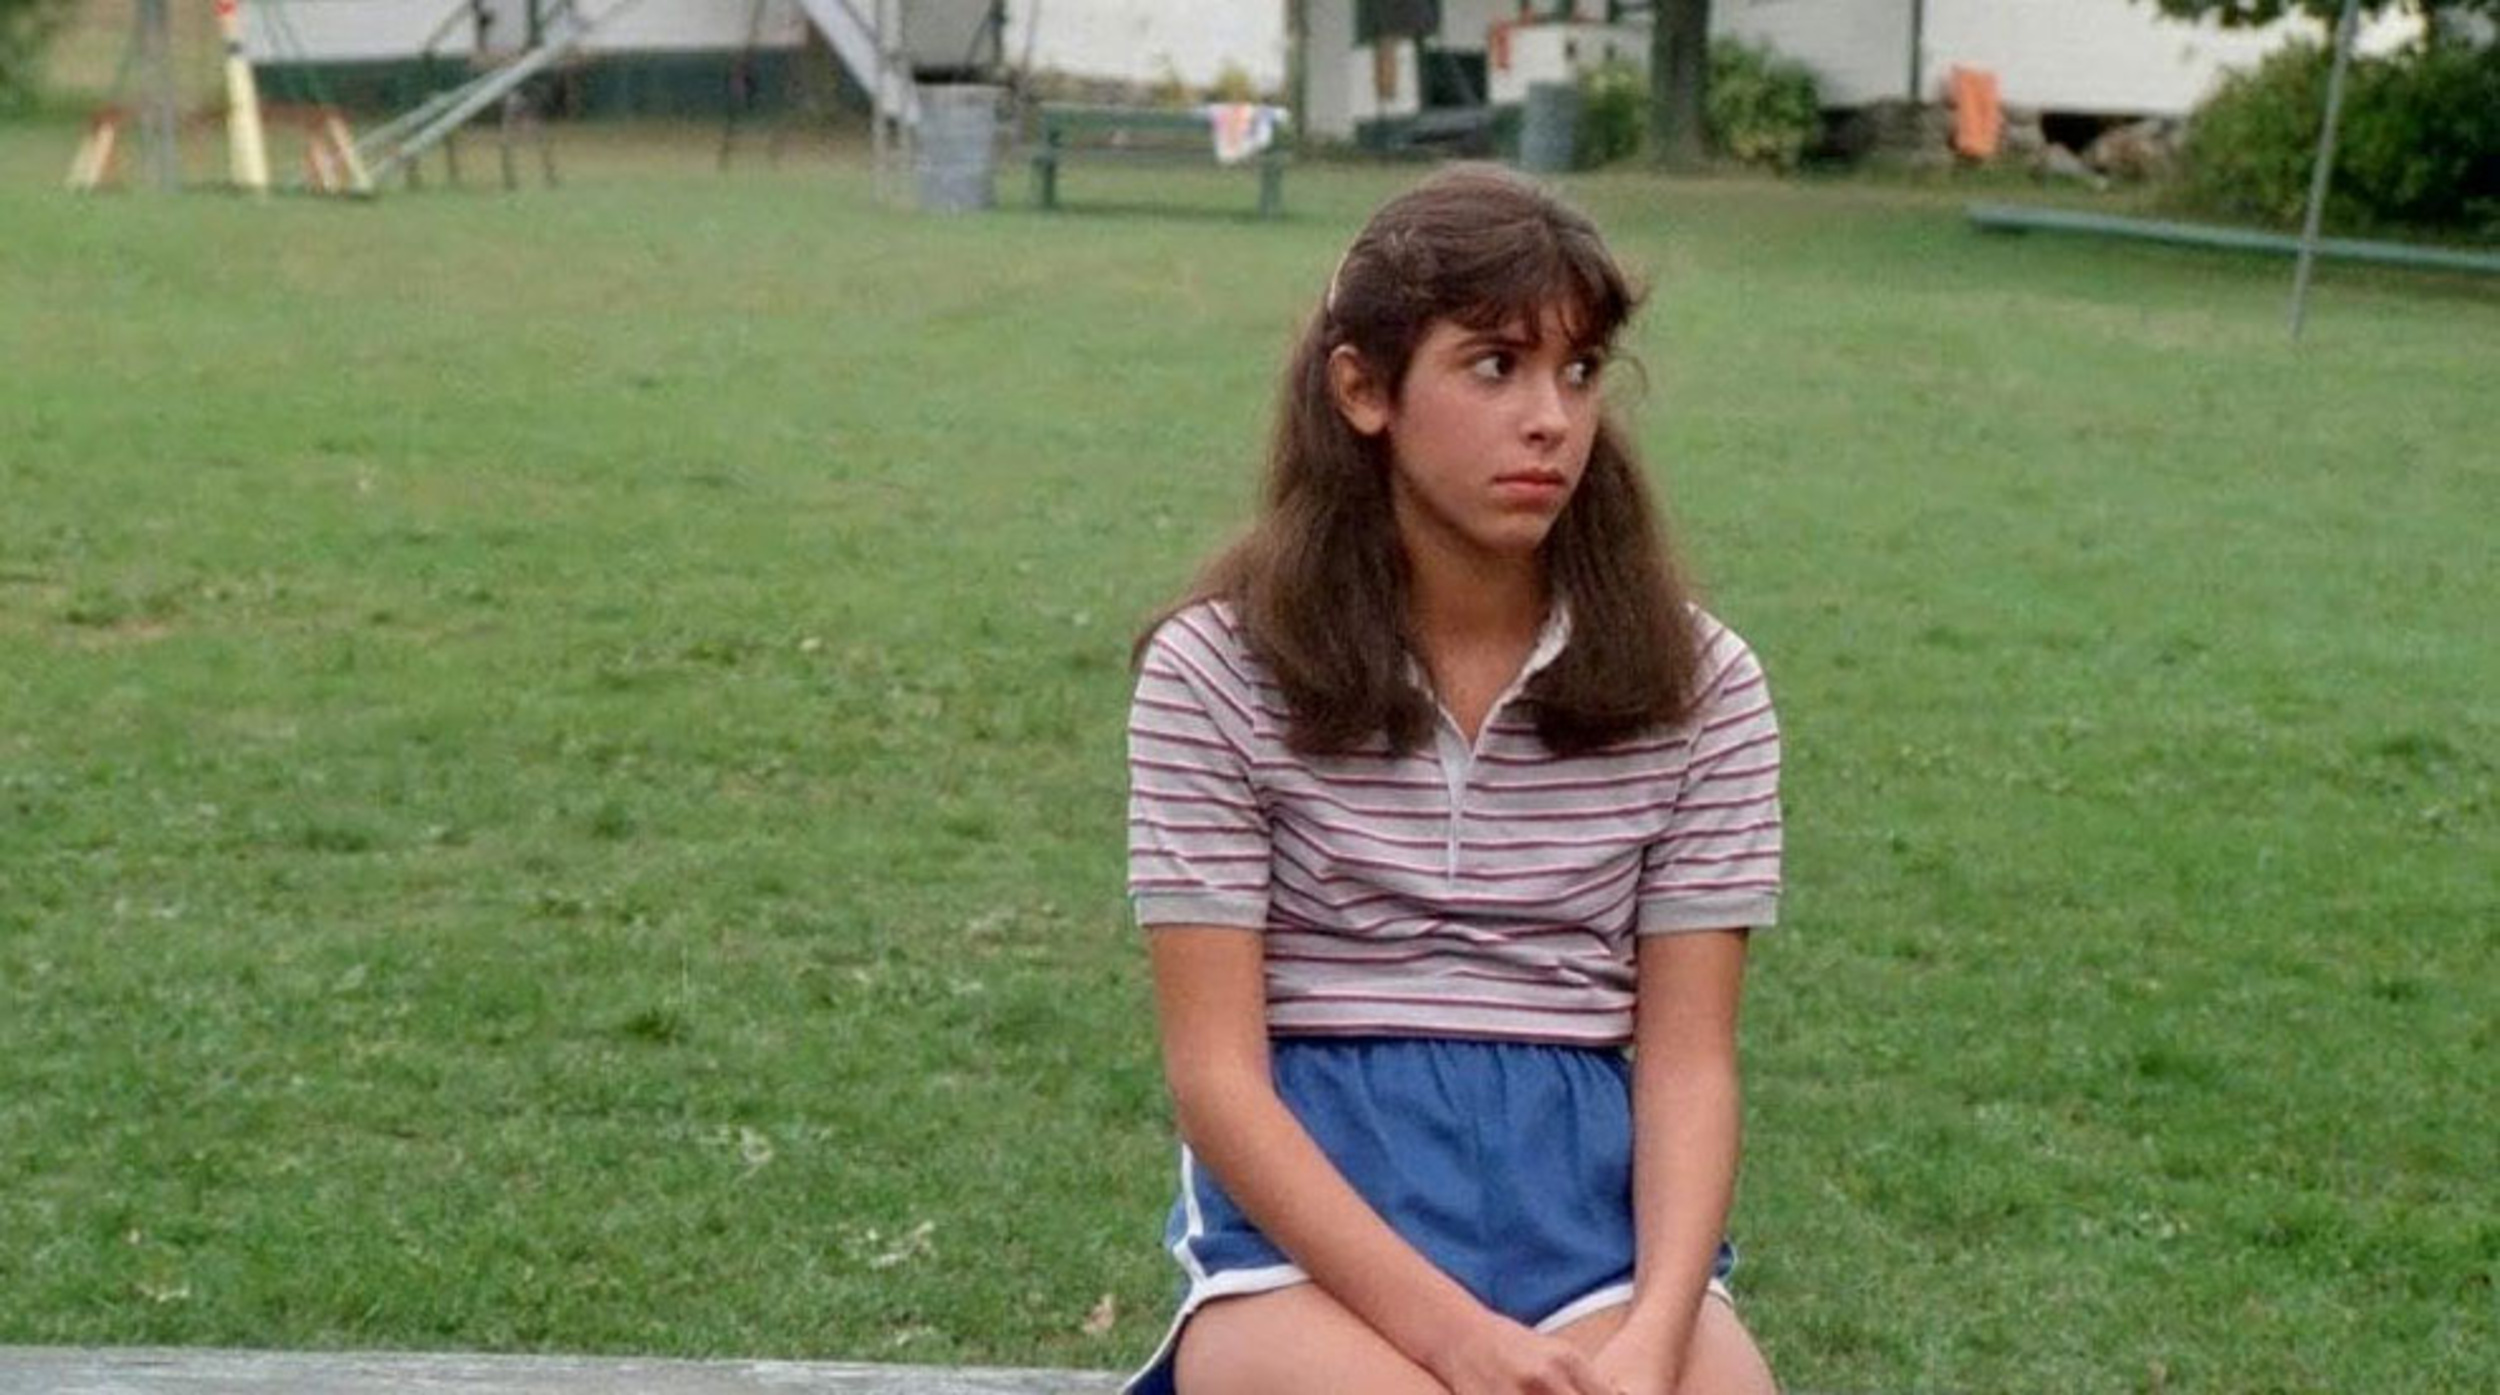 <p>If you’ve never seen the original “Sleepaway Camp," drop everything you’re doing (unless you’re delivering a baby or something; maybe finish that up), and fire up a stream of this slasher classic immediately. What Robert Hiltzik’s original lacks in craftsmanship (and it lacks <em>a lot</em>), it more than makes up for in bizarre moments and a mind-blowing finale that turned it into one of the most talked-about cult horror films of the 1980s. Sequels were inevitable, and director Michael A. Simpson maintains the lo-fi aesthetic while injecting an overt tone of self-parody that’s alternately amusing and grating. Pamela Springsteen (the sister of The Boss) has a great time as the killer/protagonist. Stay far away from Hiltzik’s botched “Return to Sleepaway Camp."</p><p>You may also like: <a href='https://www.yardbarker.com/entertainment/articles/20_facts_you_might_not_know_about_the_incredible_hulk_030624/s1__37995542'>20 facts you might not know about 'The Incredible Hulk'</a></p>